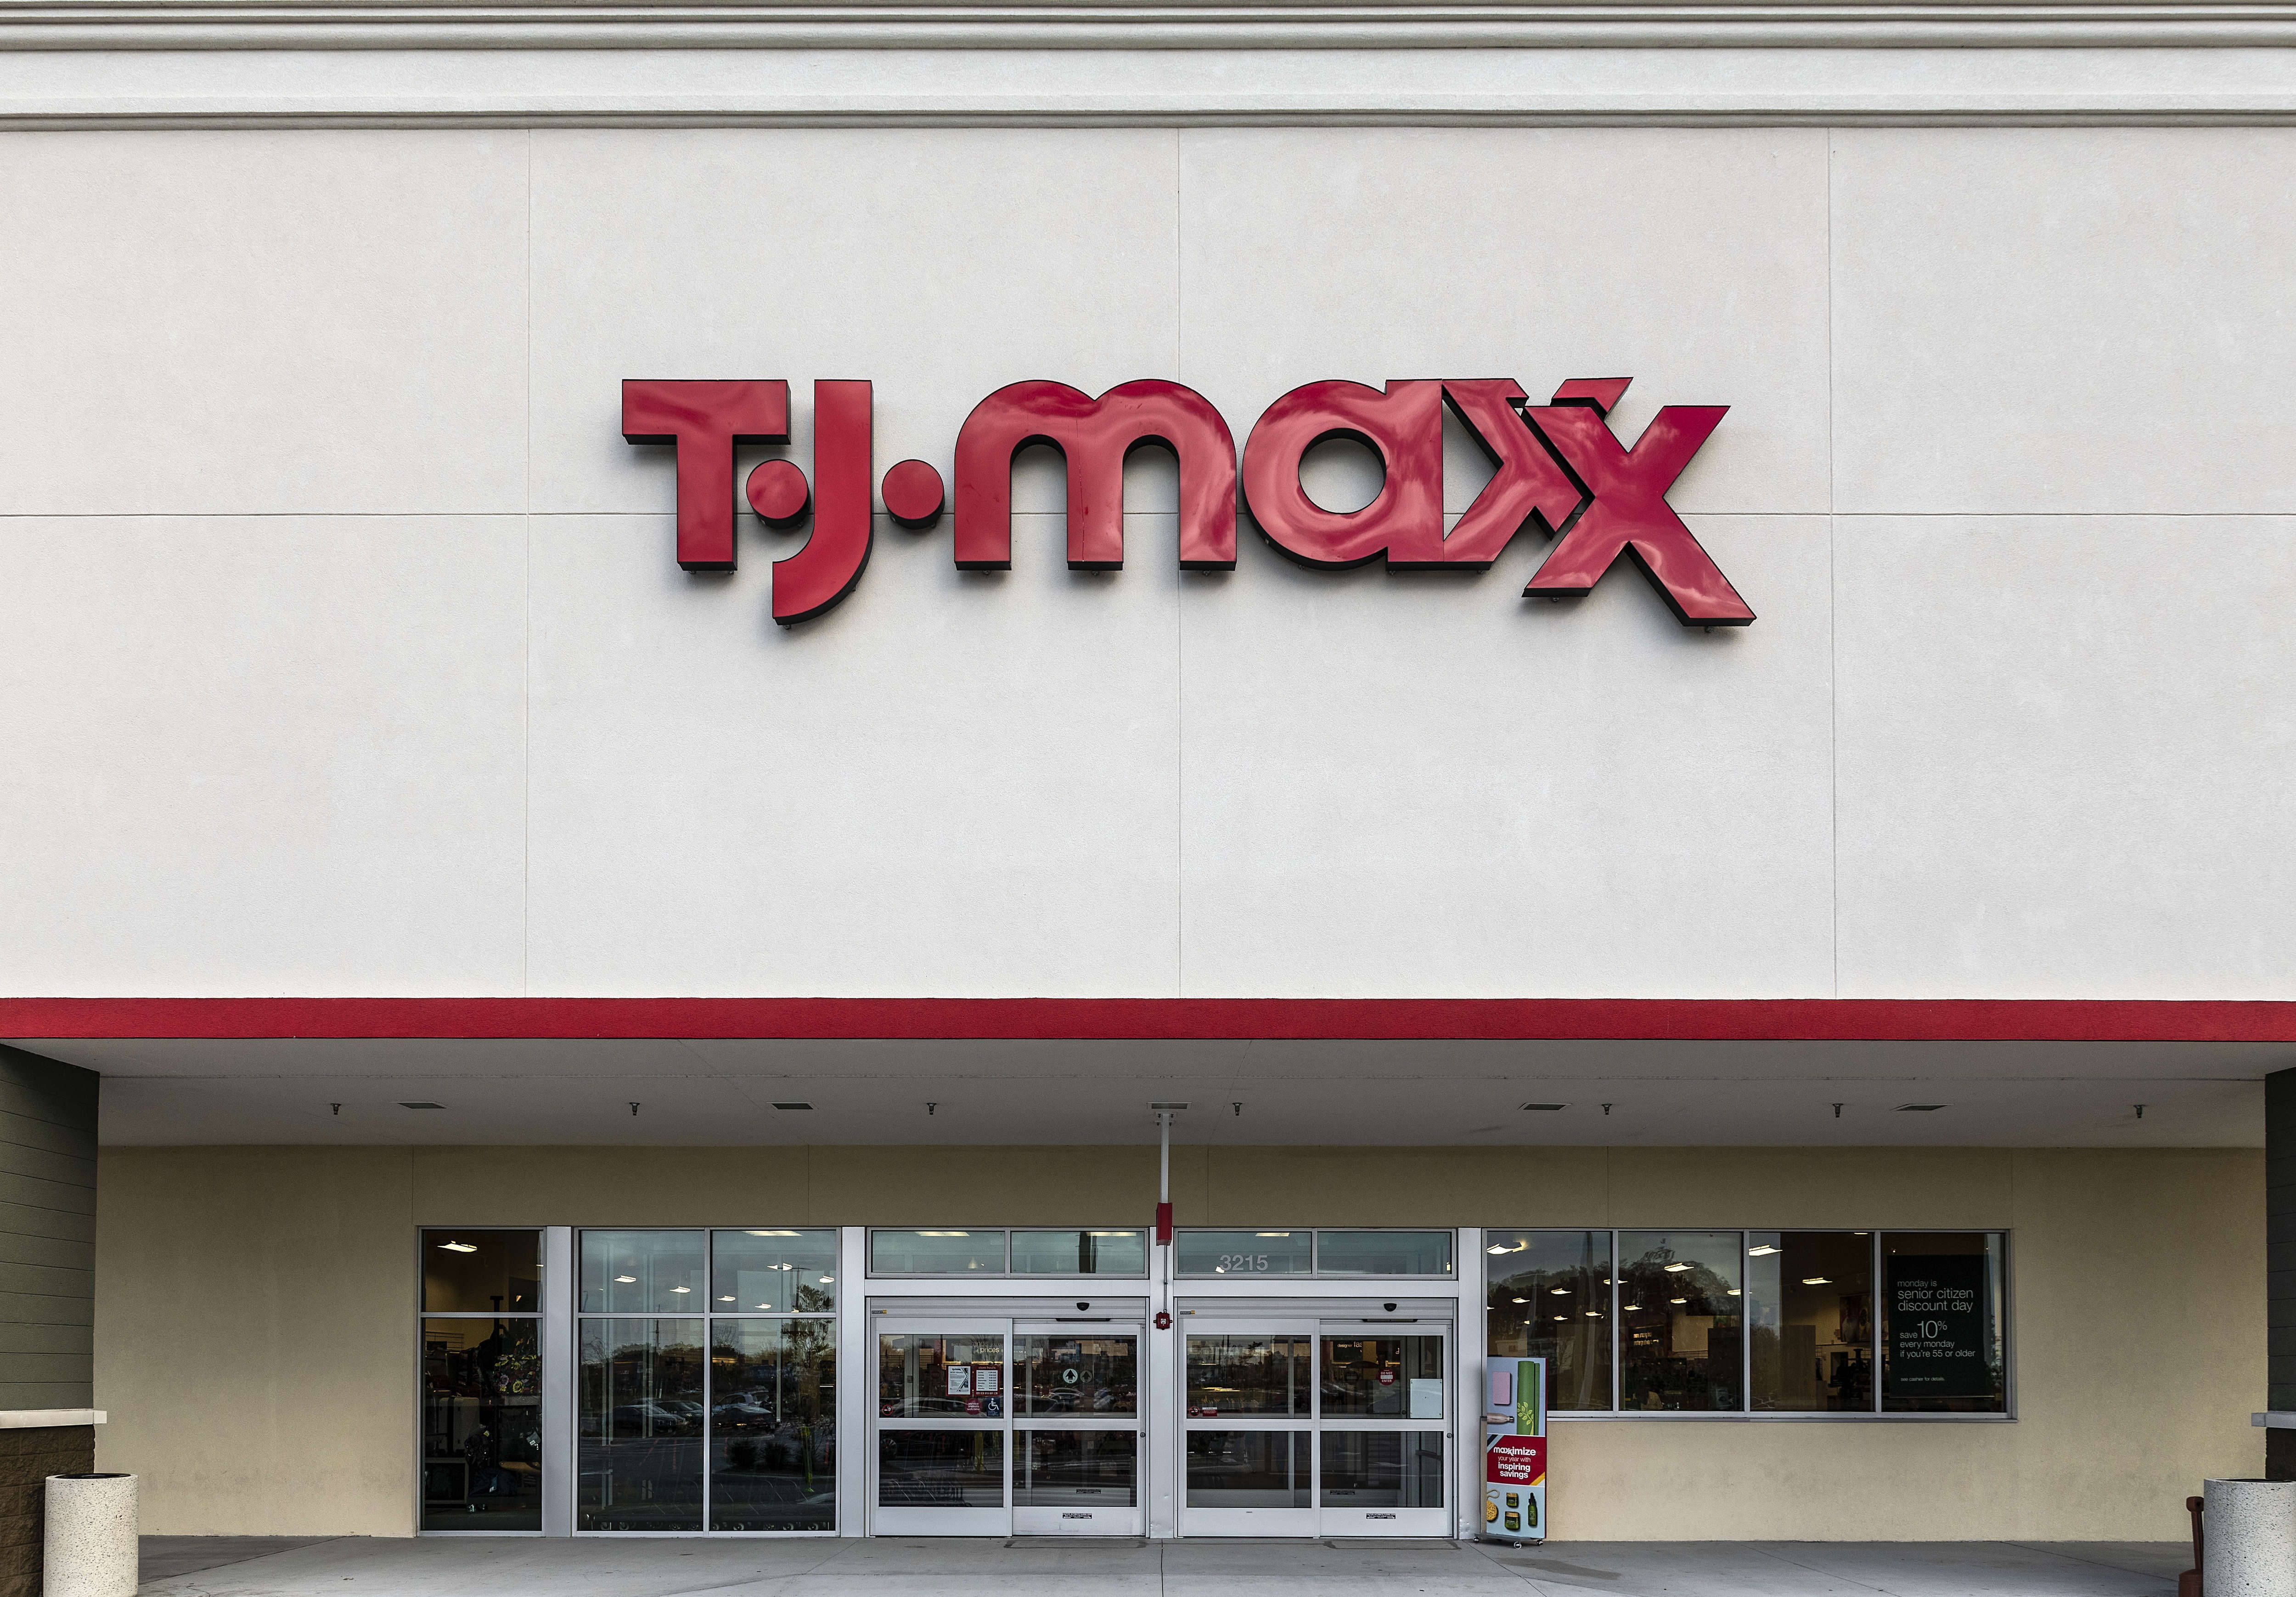 Decorating for Thanksgiving? Go to TJ Maxx!